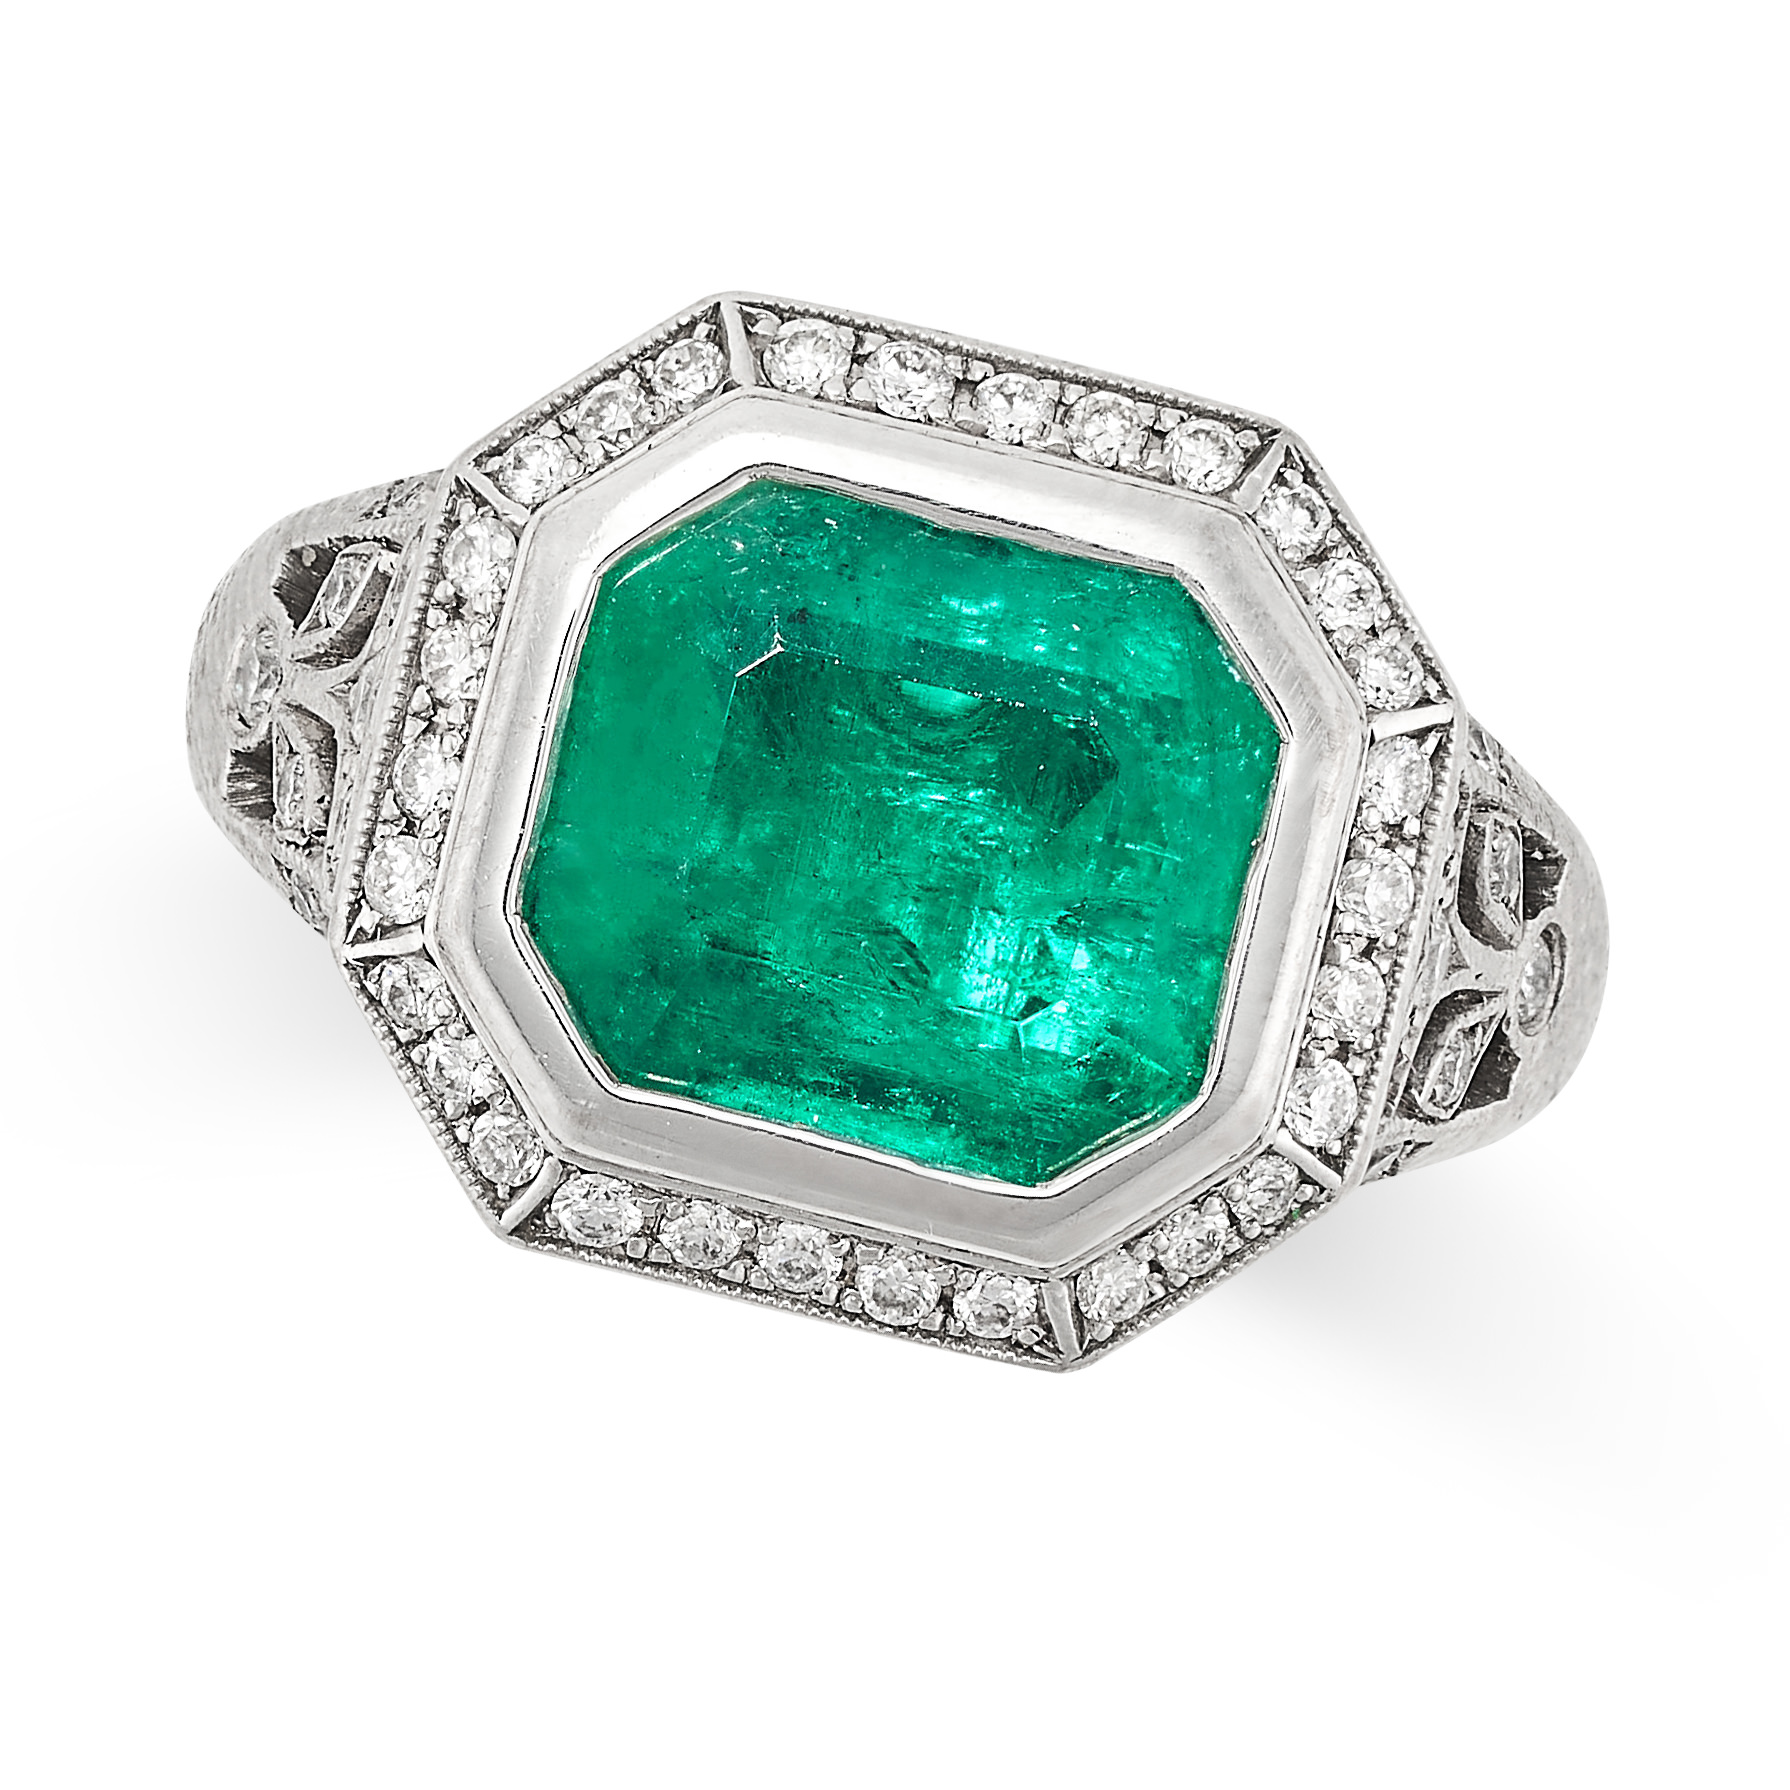 AN EMERALD AND DIAMOND RING in 18ct white gold, set with an octagonal cut emerald of 2.33 carats